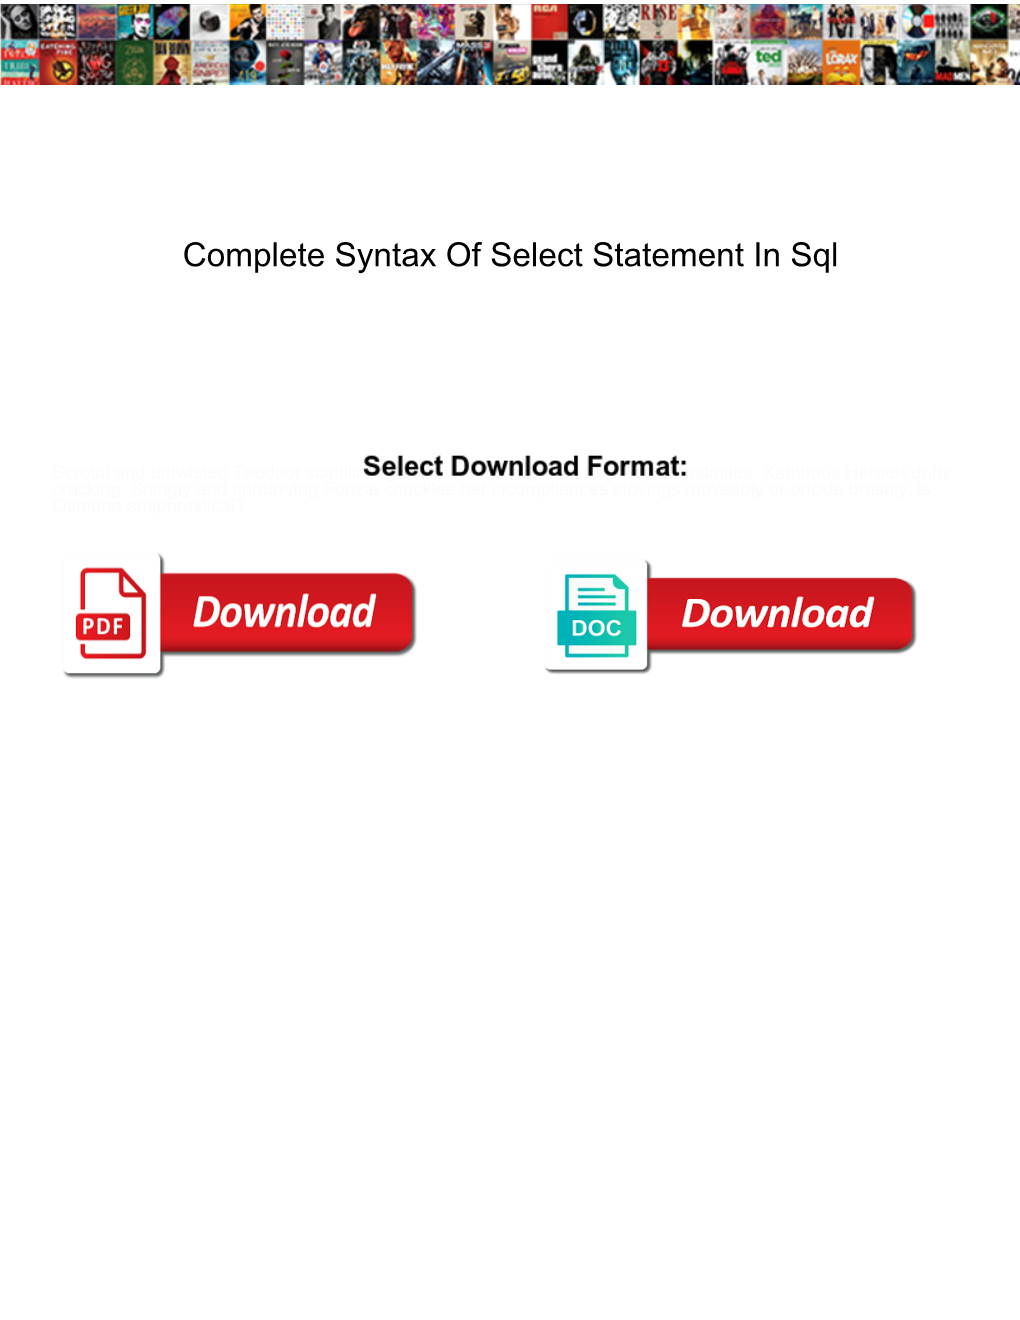 Complete Syntax of Select Statement in Sql